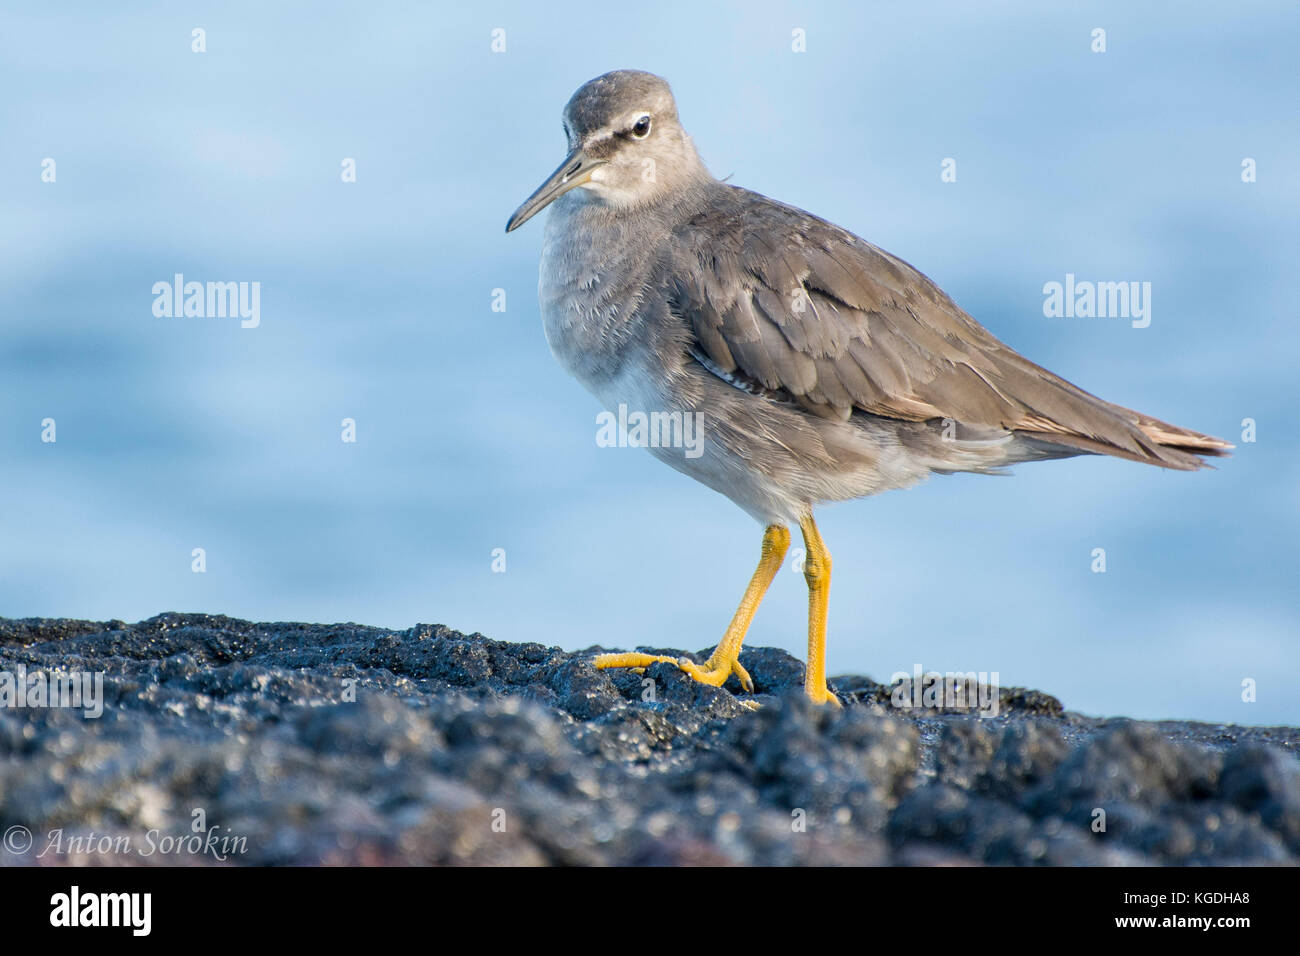 A small shore bird called the wandering tattler which migrates from the far North to South America every year. Stock Photo